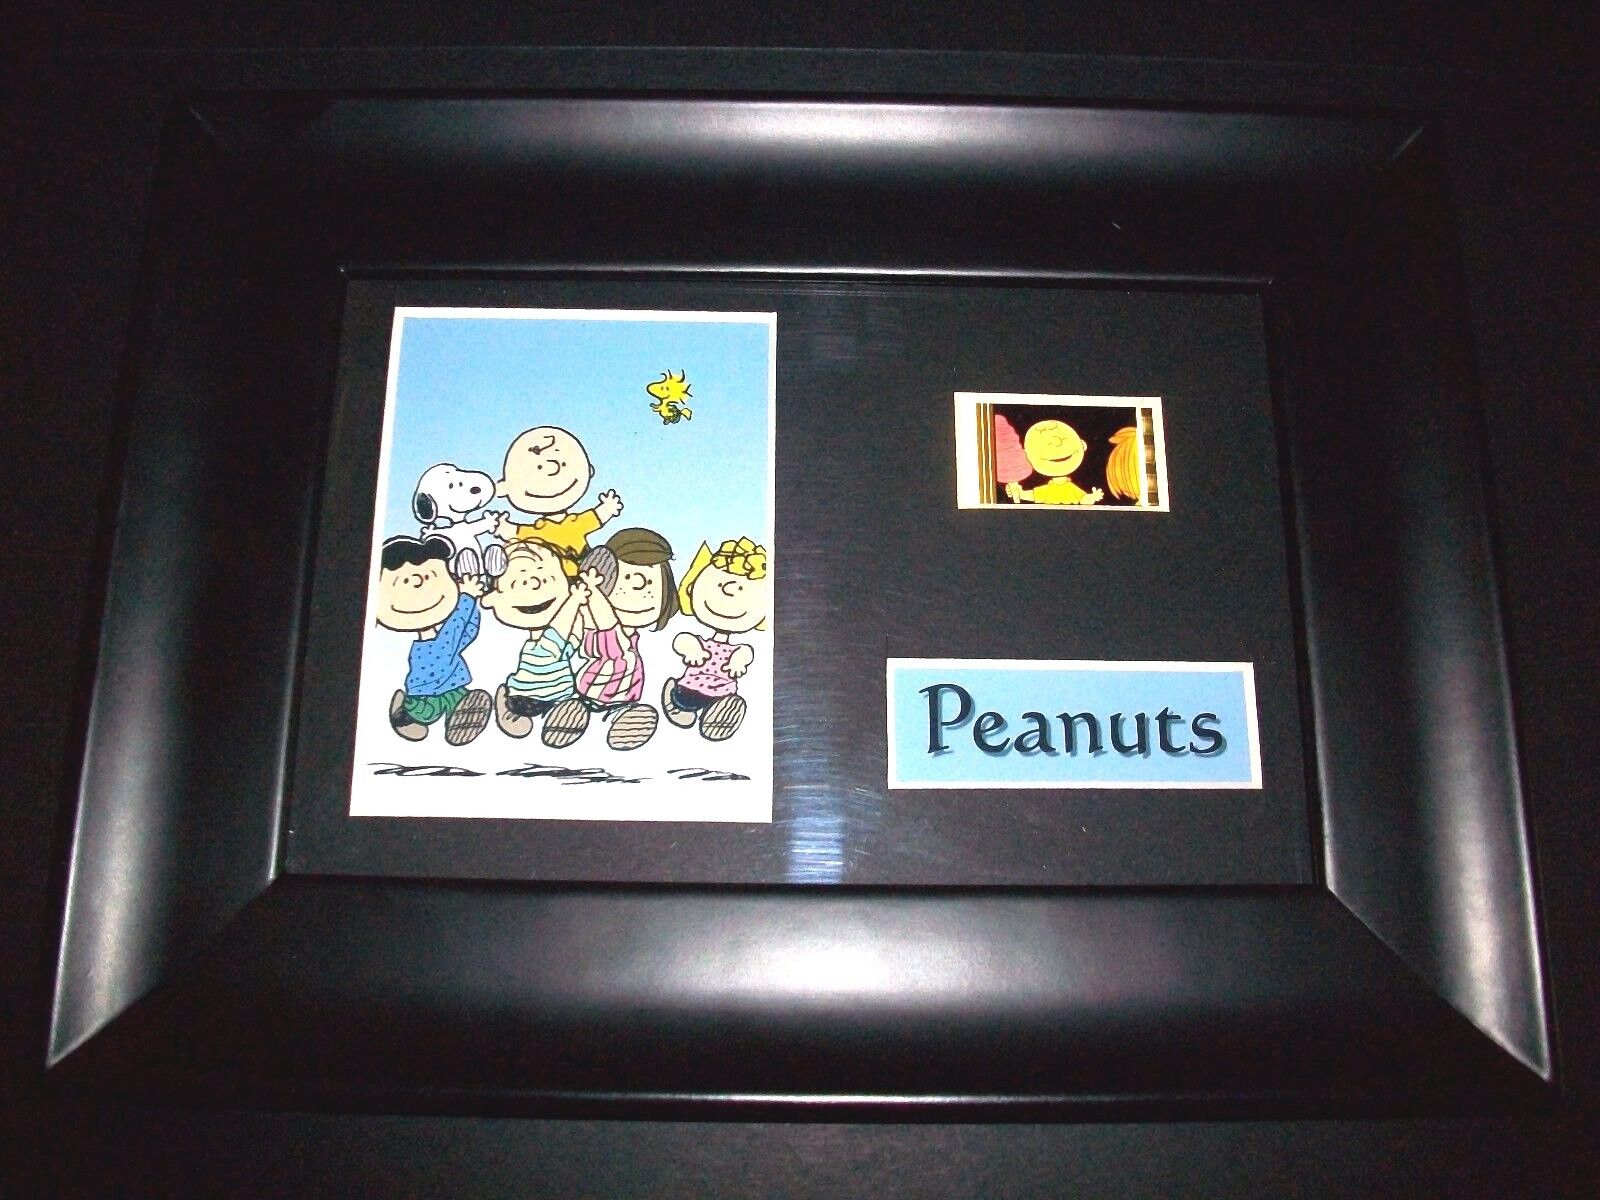 PEANUTS Framed Movie Film Cell Memorabilia - Compliments poster dvd snoopy